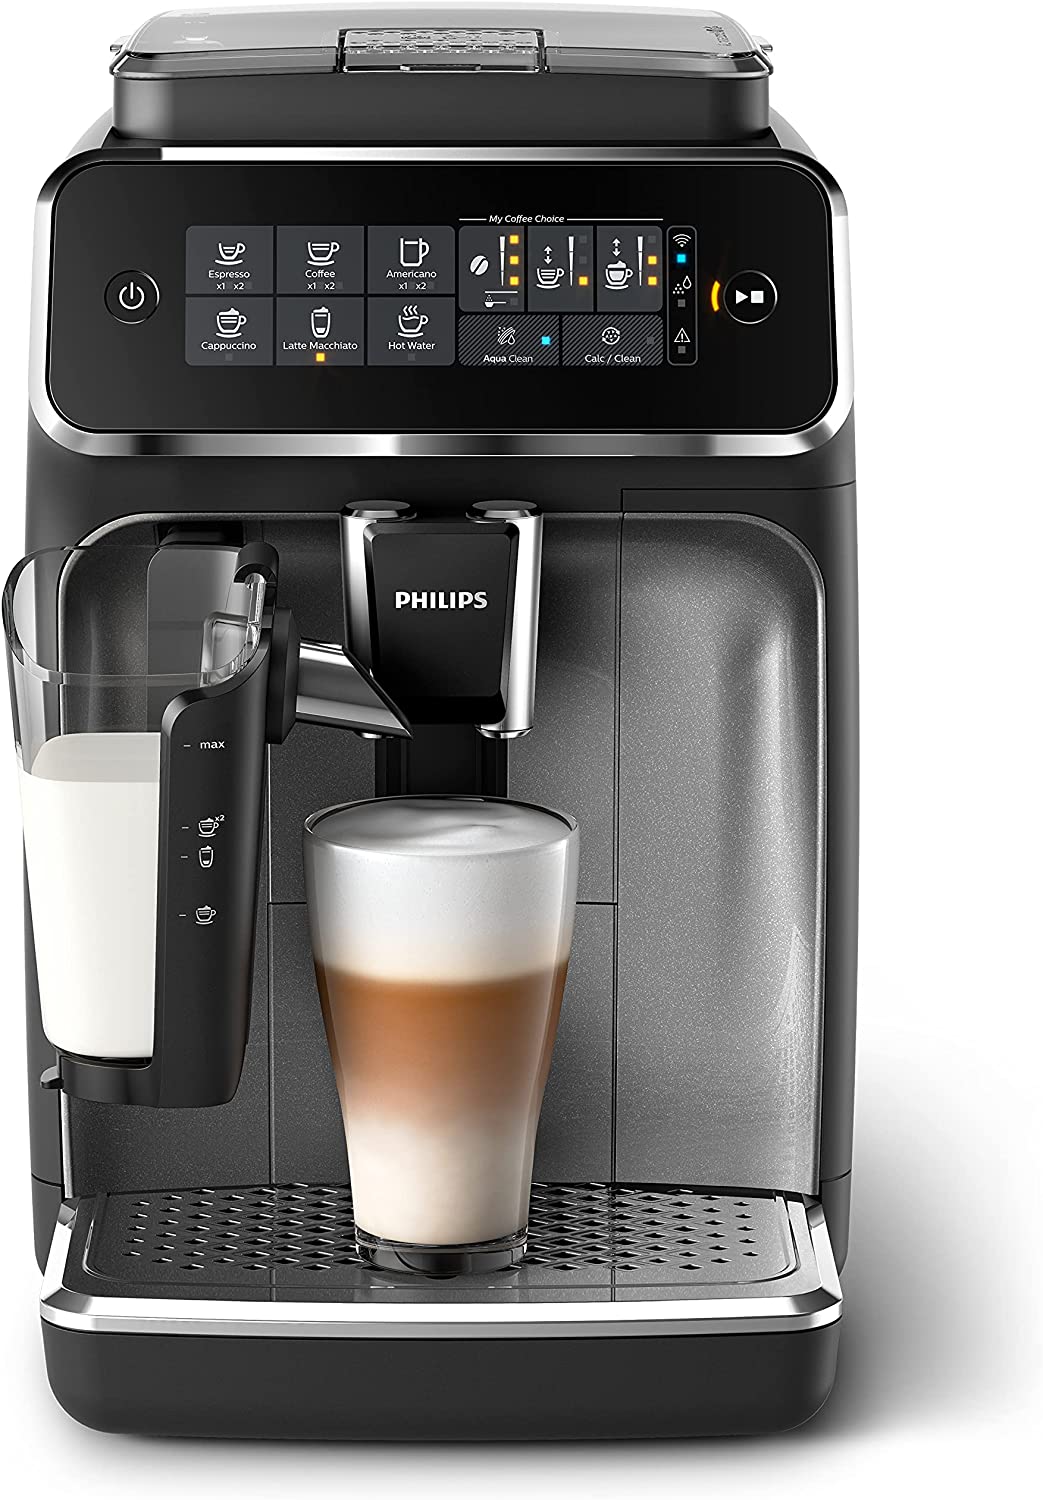 Philips Domestic Appliances Philips 3200 Series, Fully Automatic Coffee Machine with WiFi Connectivity 